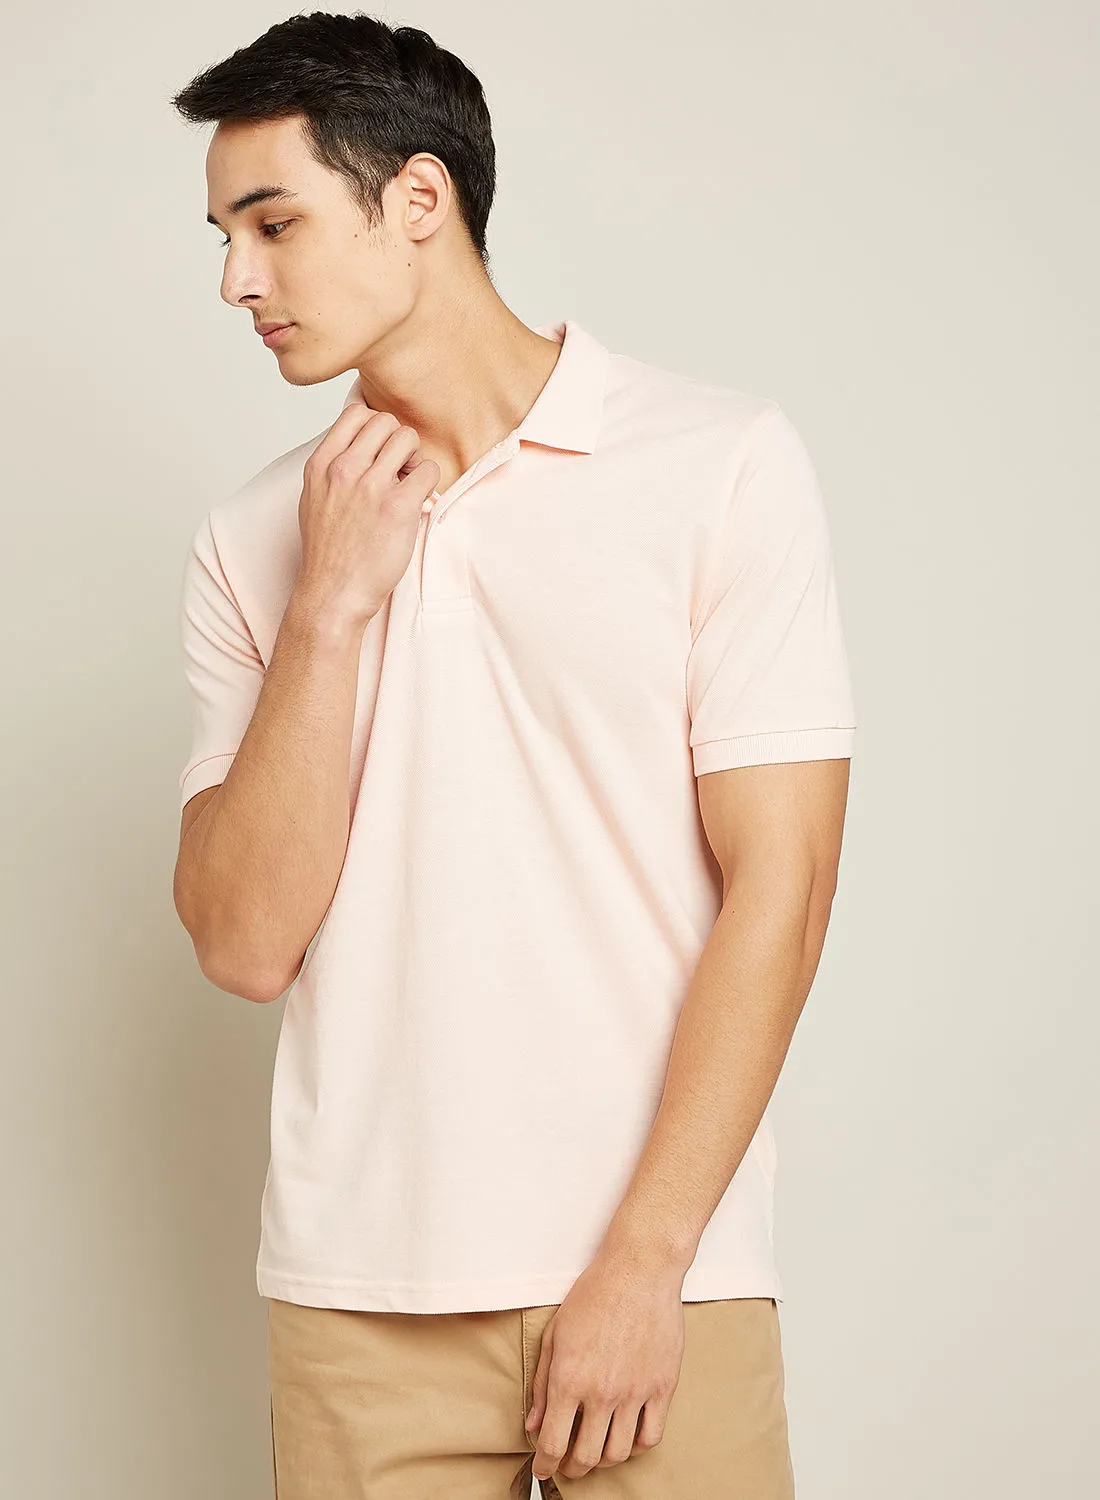 noon east Polo Neck T-Shirt, 100% Cotton, Comfort Fit Washed Light Pink